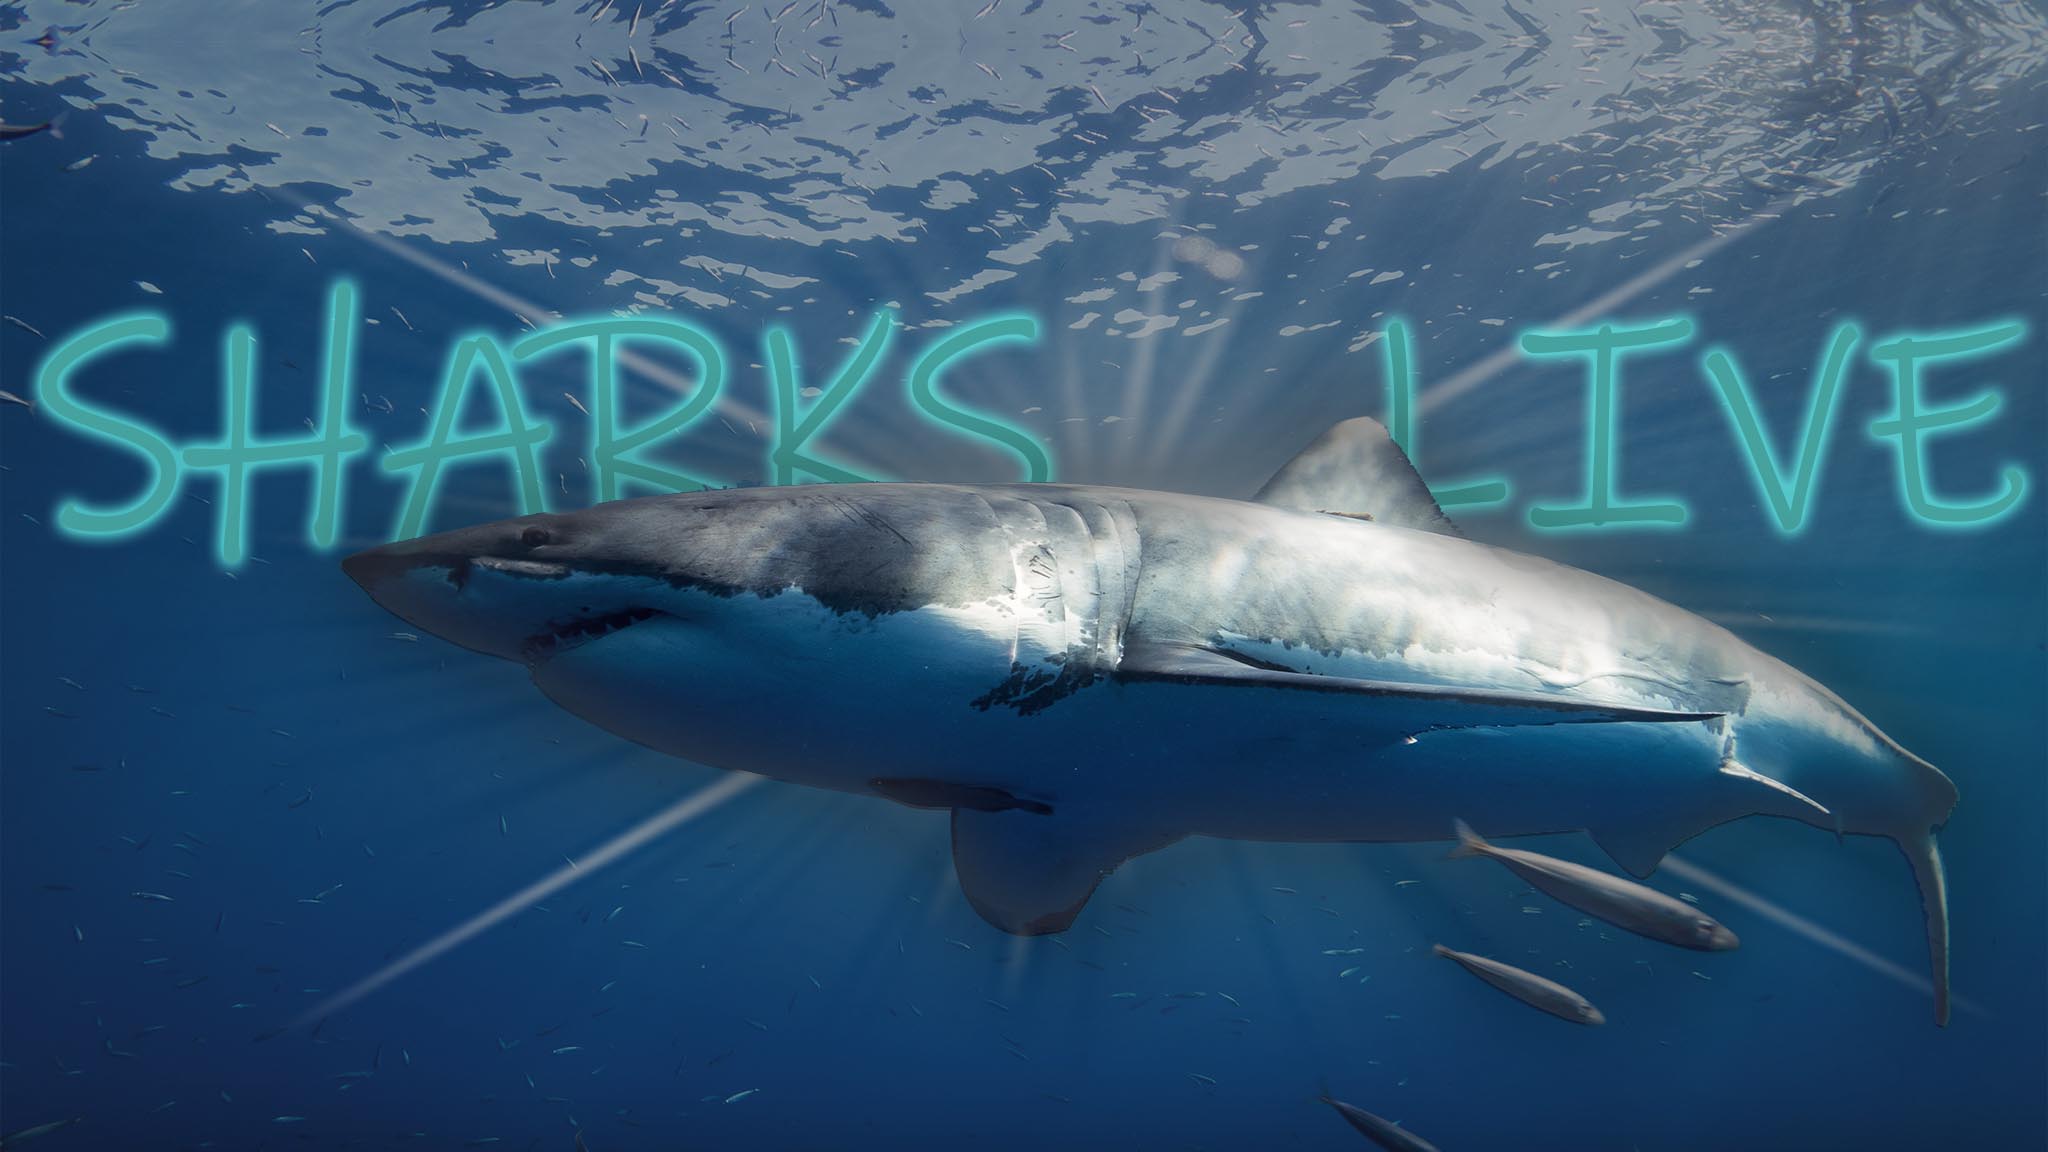 Sharkslive - Live daily streaming broadcasts of white shark cage diving expeditions